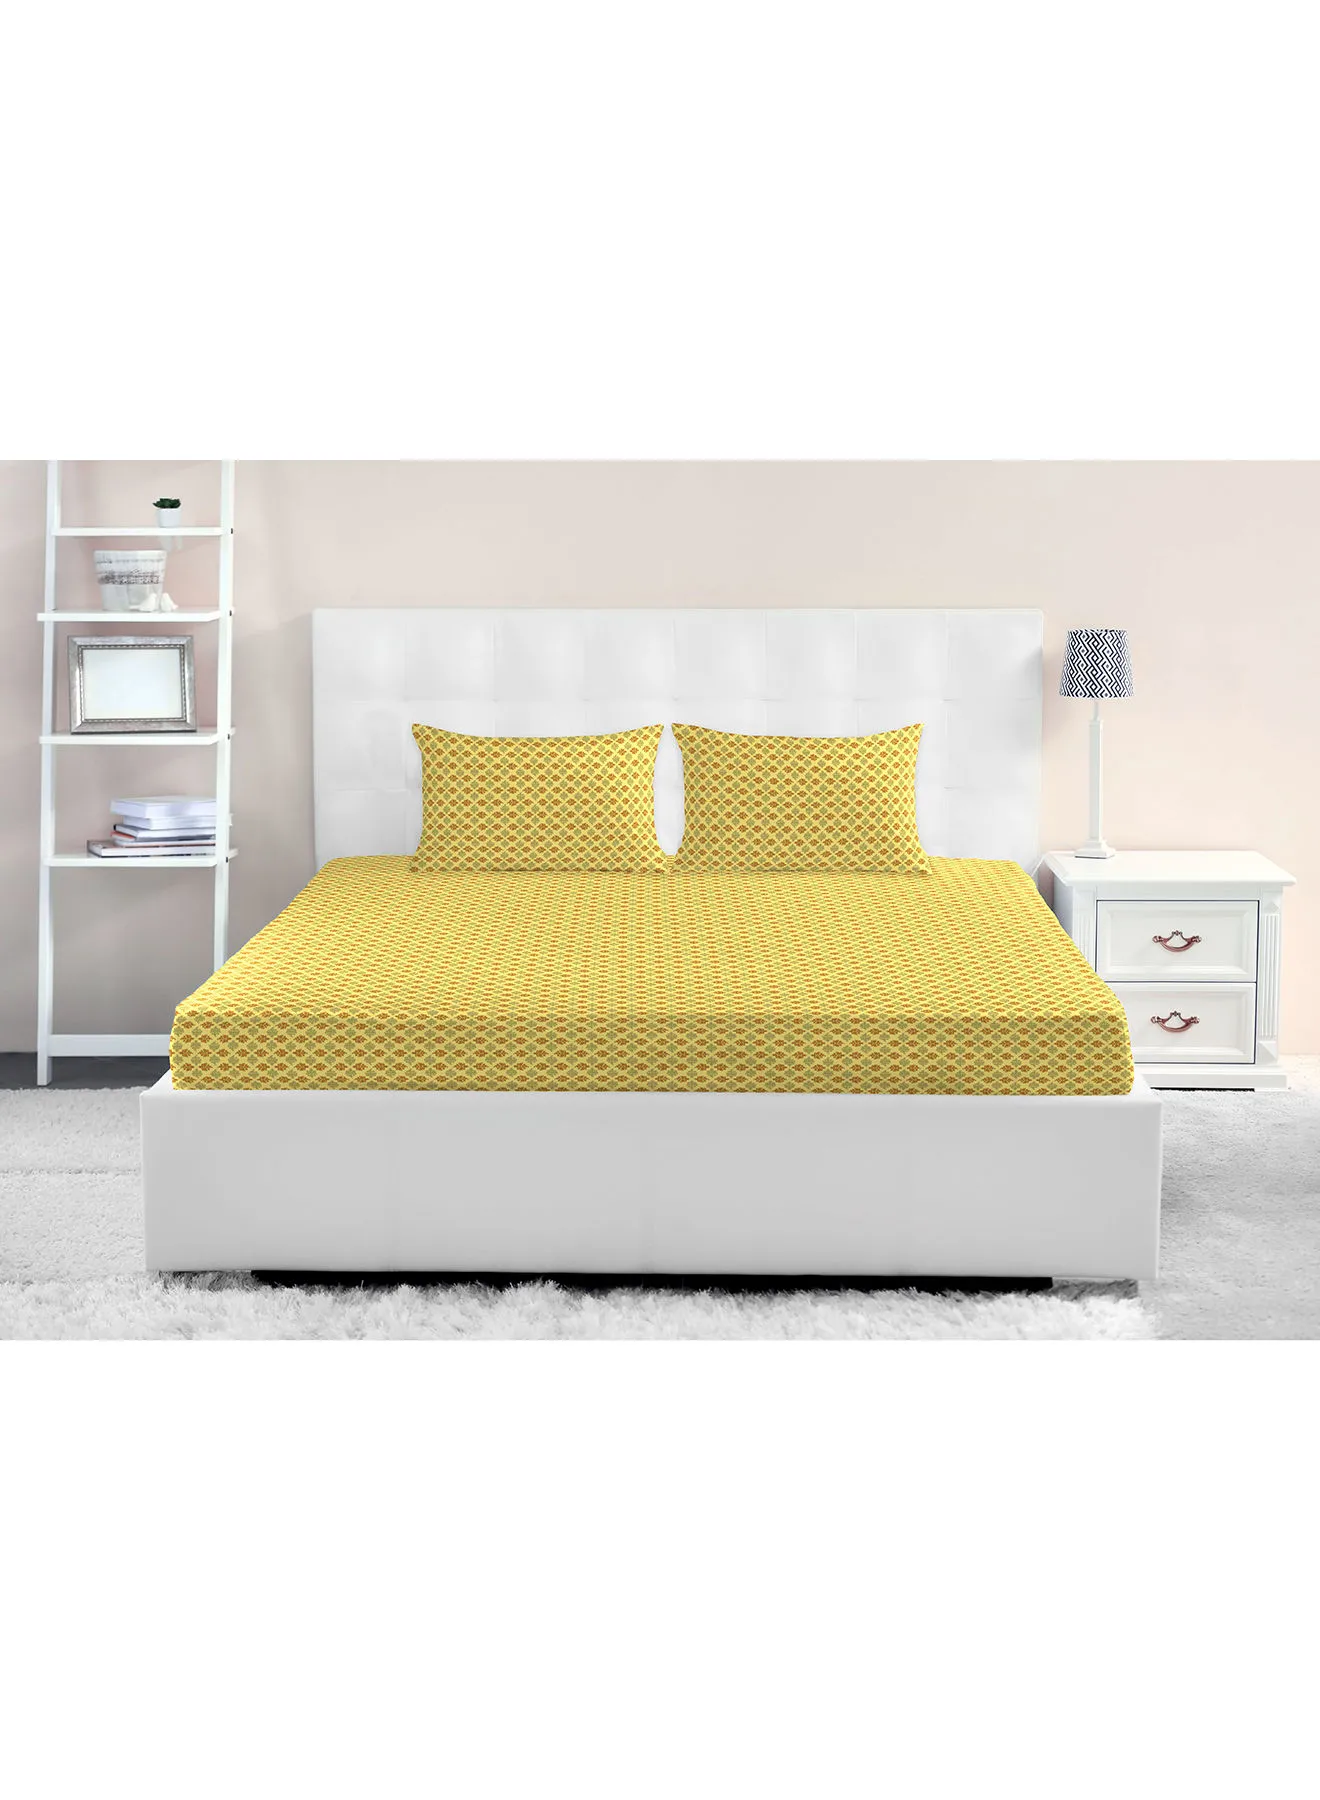 Amal Fitted Bedsheet Set Twin Size High Quality 100% Cotton Percale 144 TC Light Weight Everyday Use 1 Bed Sheet And 2 Pillow Cases Printed Yellow